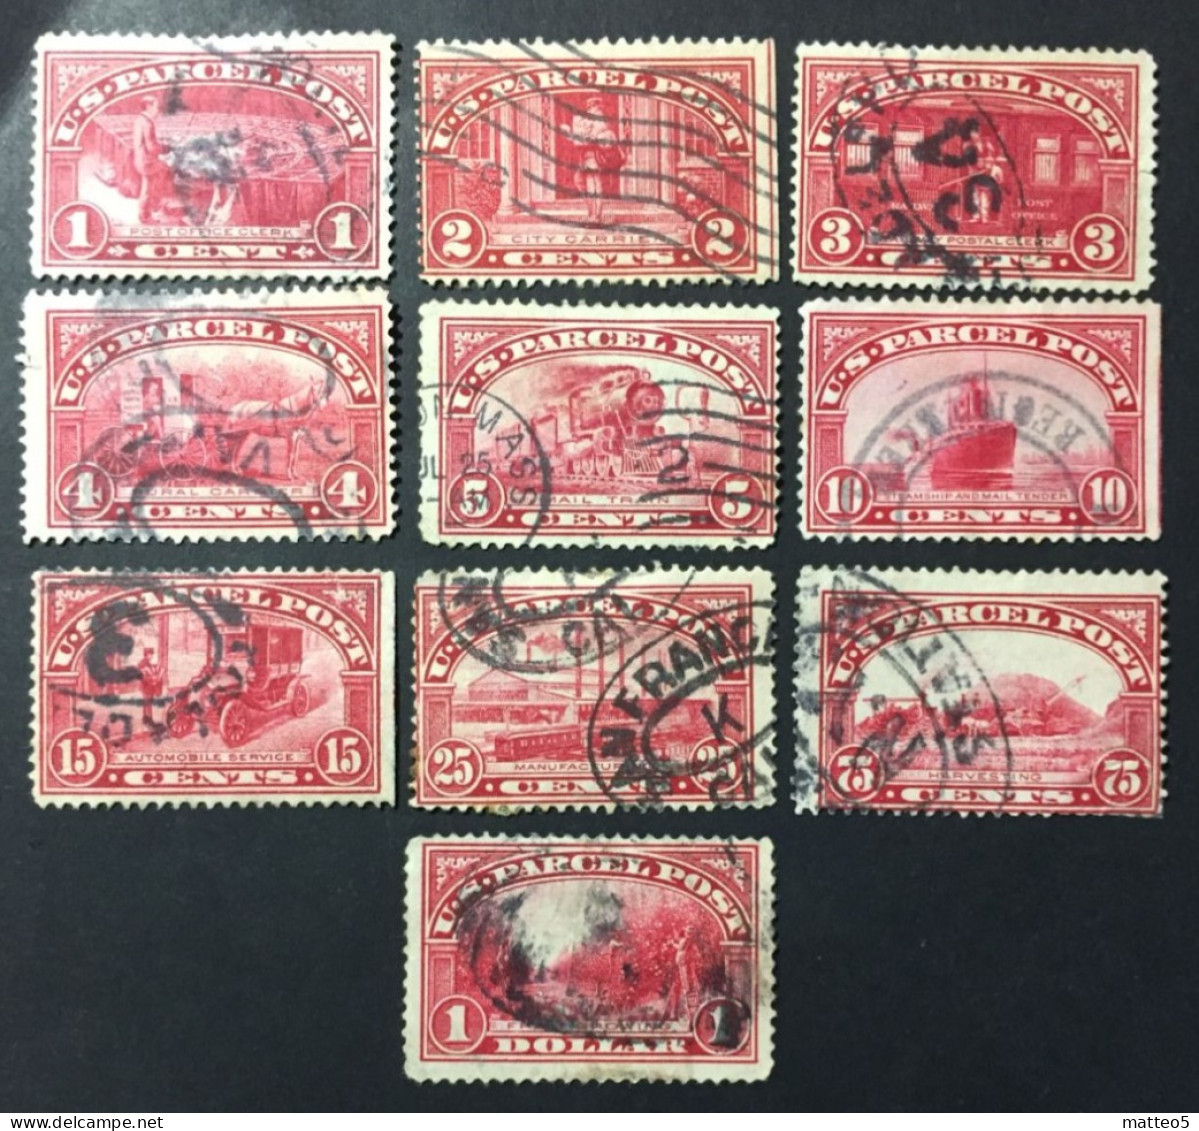 1912 - United States - Parcel Post Colonies Postage Due With - 10 Stamps - Used - Officials